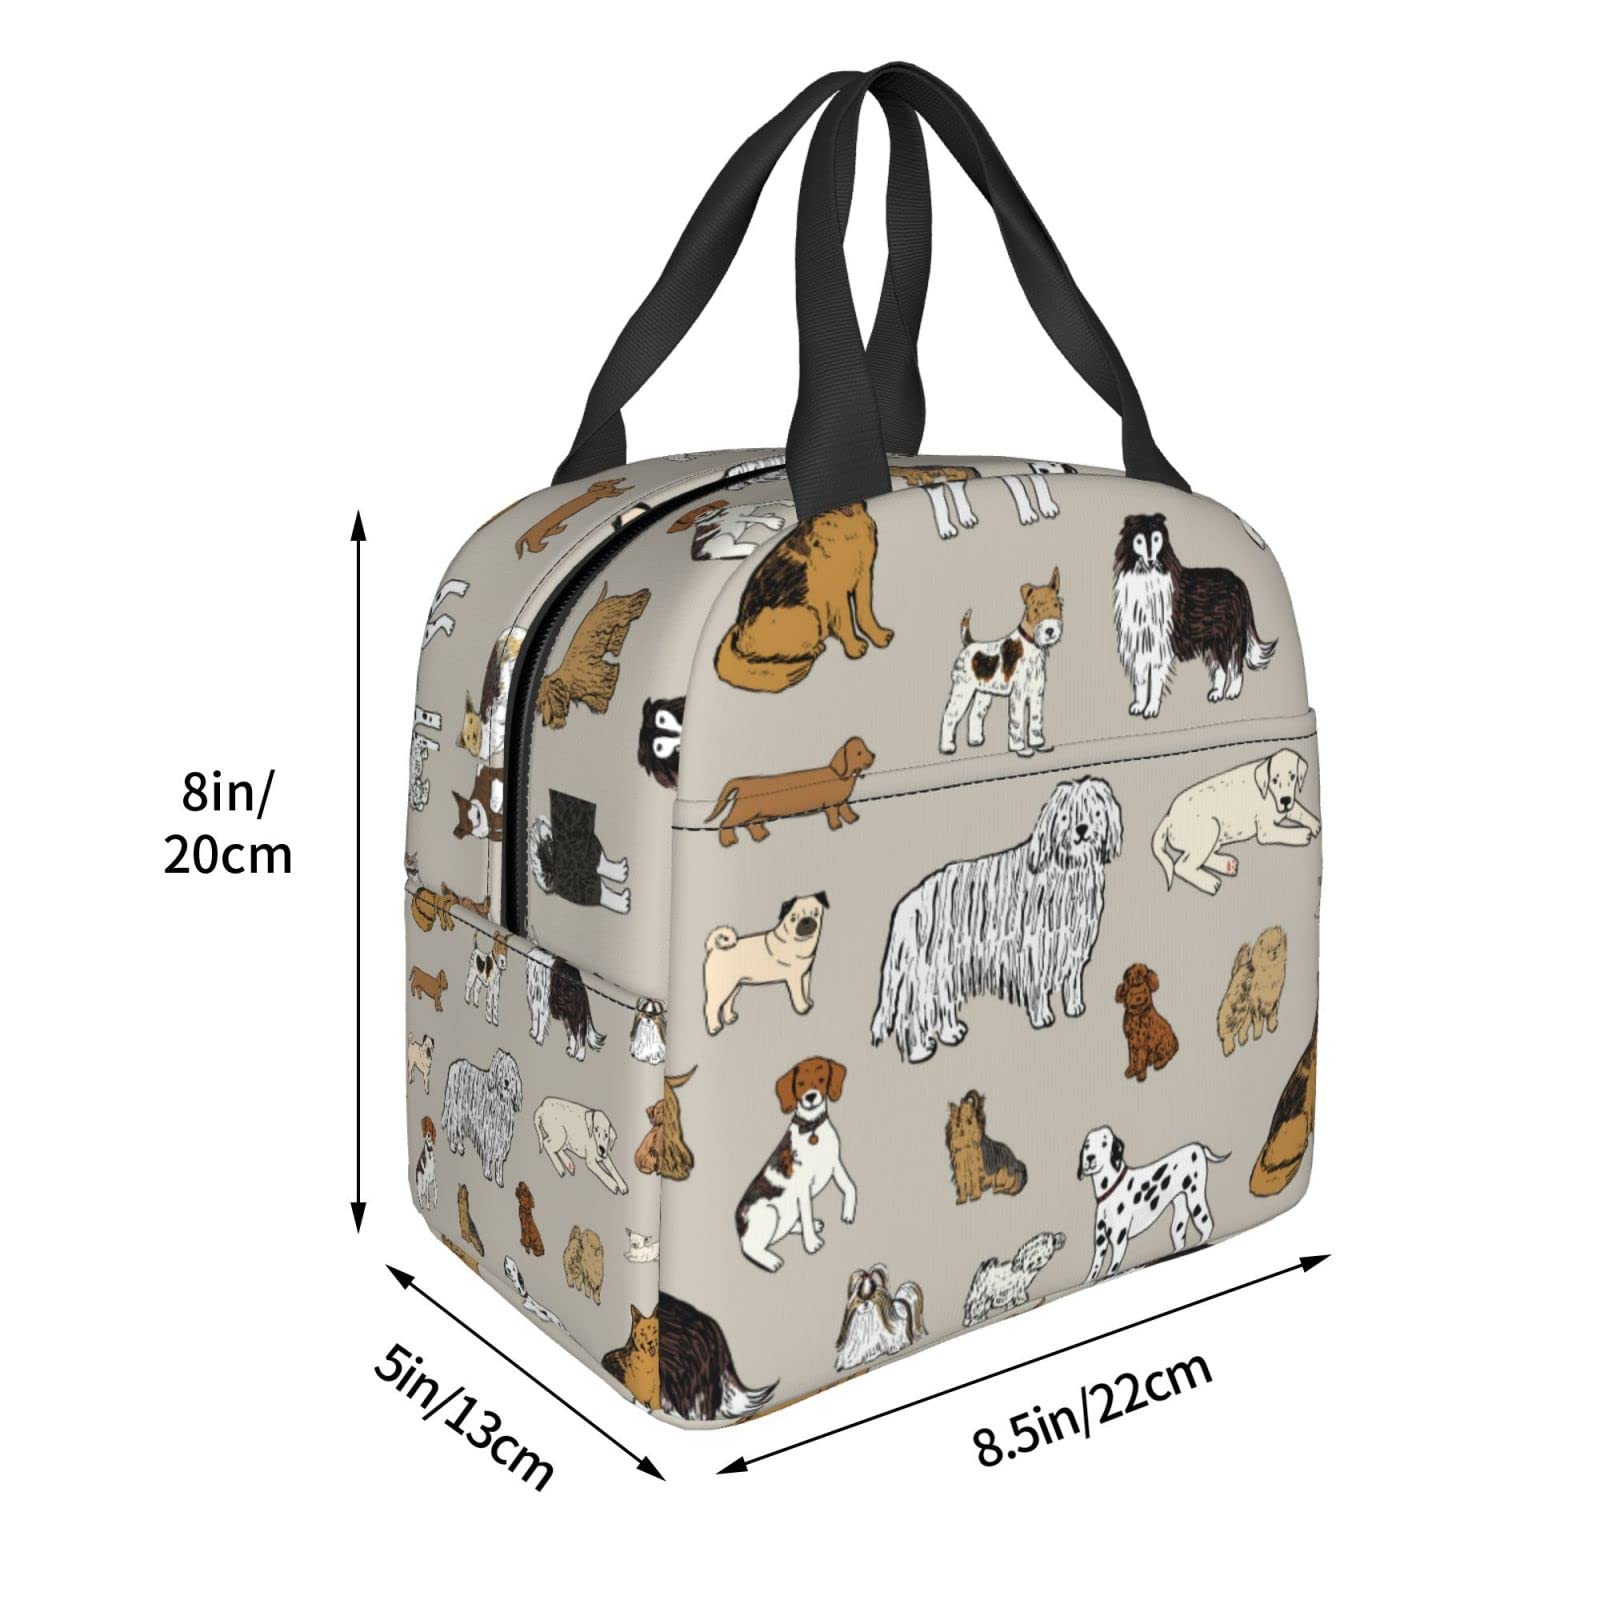 Fiokroo Lunch Bag Insulated Cute Dogs Animal Lunch Box Reusable Lunch Tote Bag For School Work College Outdoor Travel Picnic, 6l